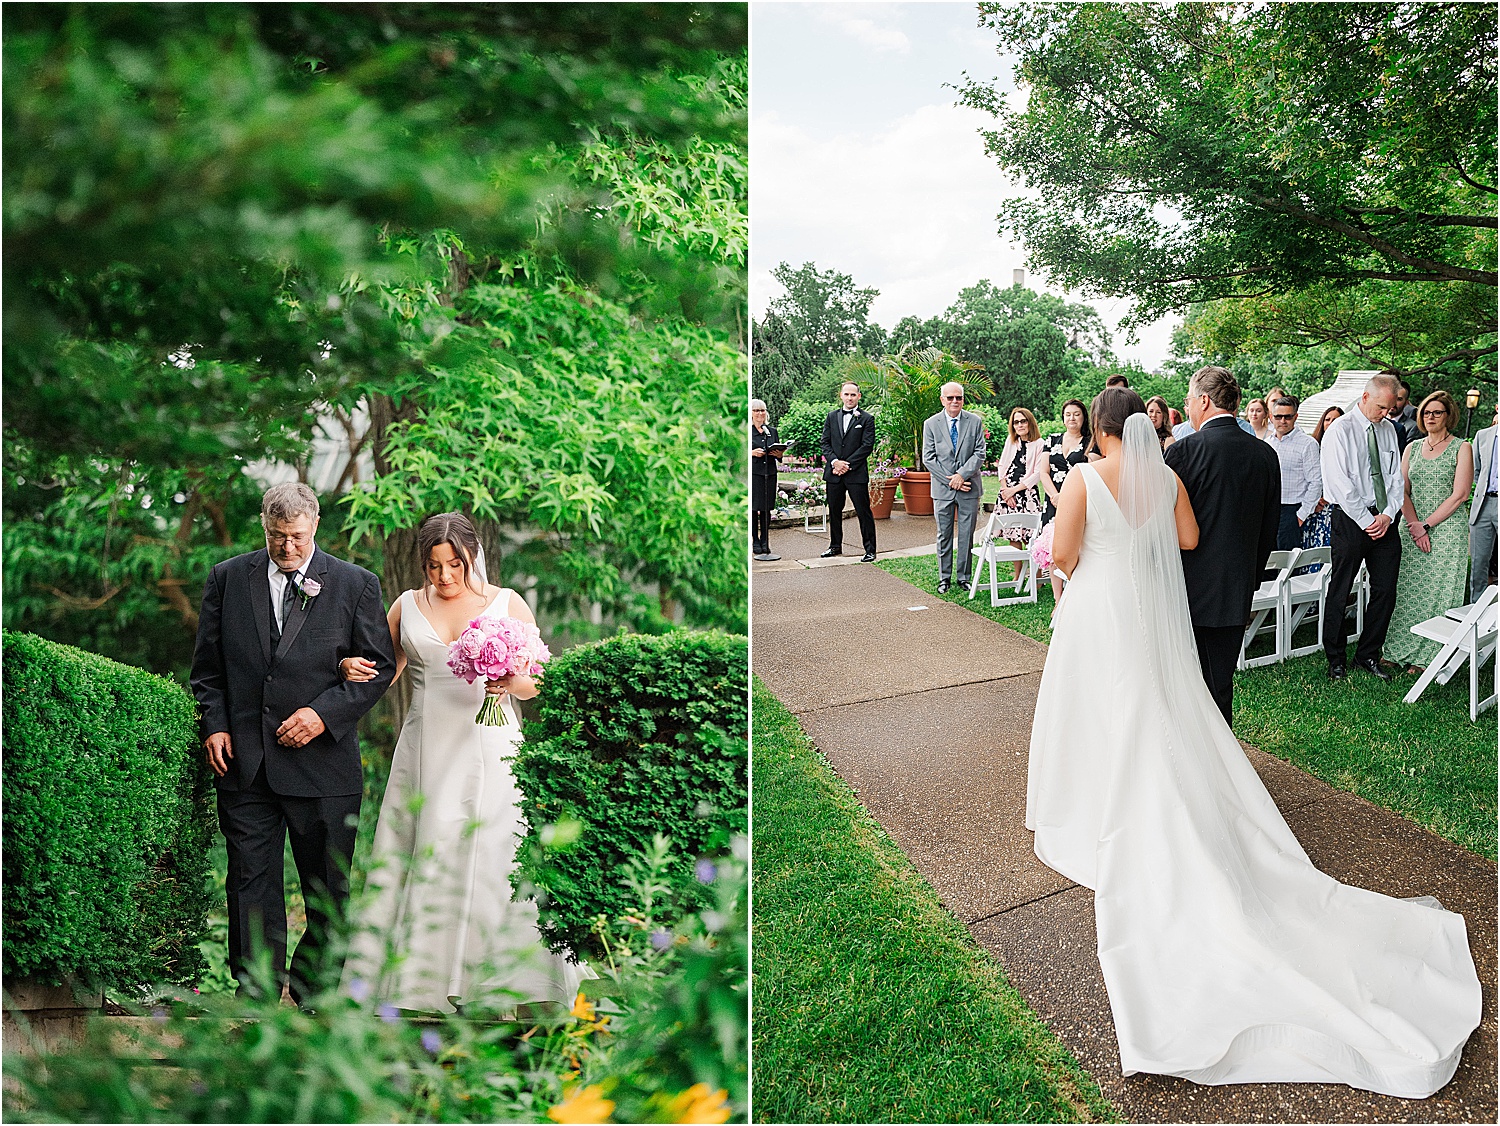 bride entrance into wedding ceremony in phipps outdoor garden • Wild Weather - Love at a Phipps Conservatory Outdoor Garden Wedding